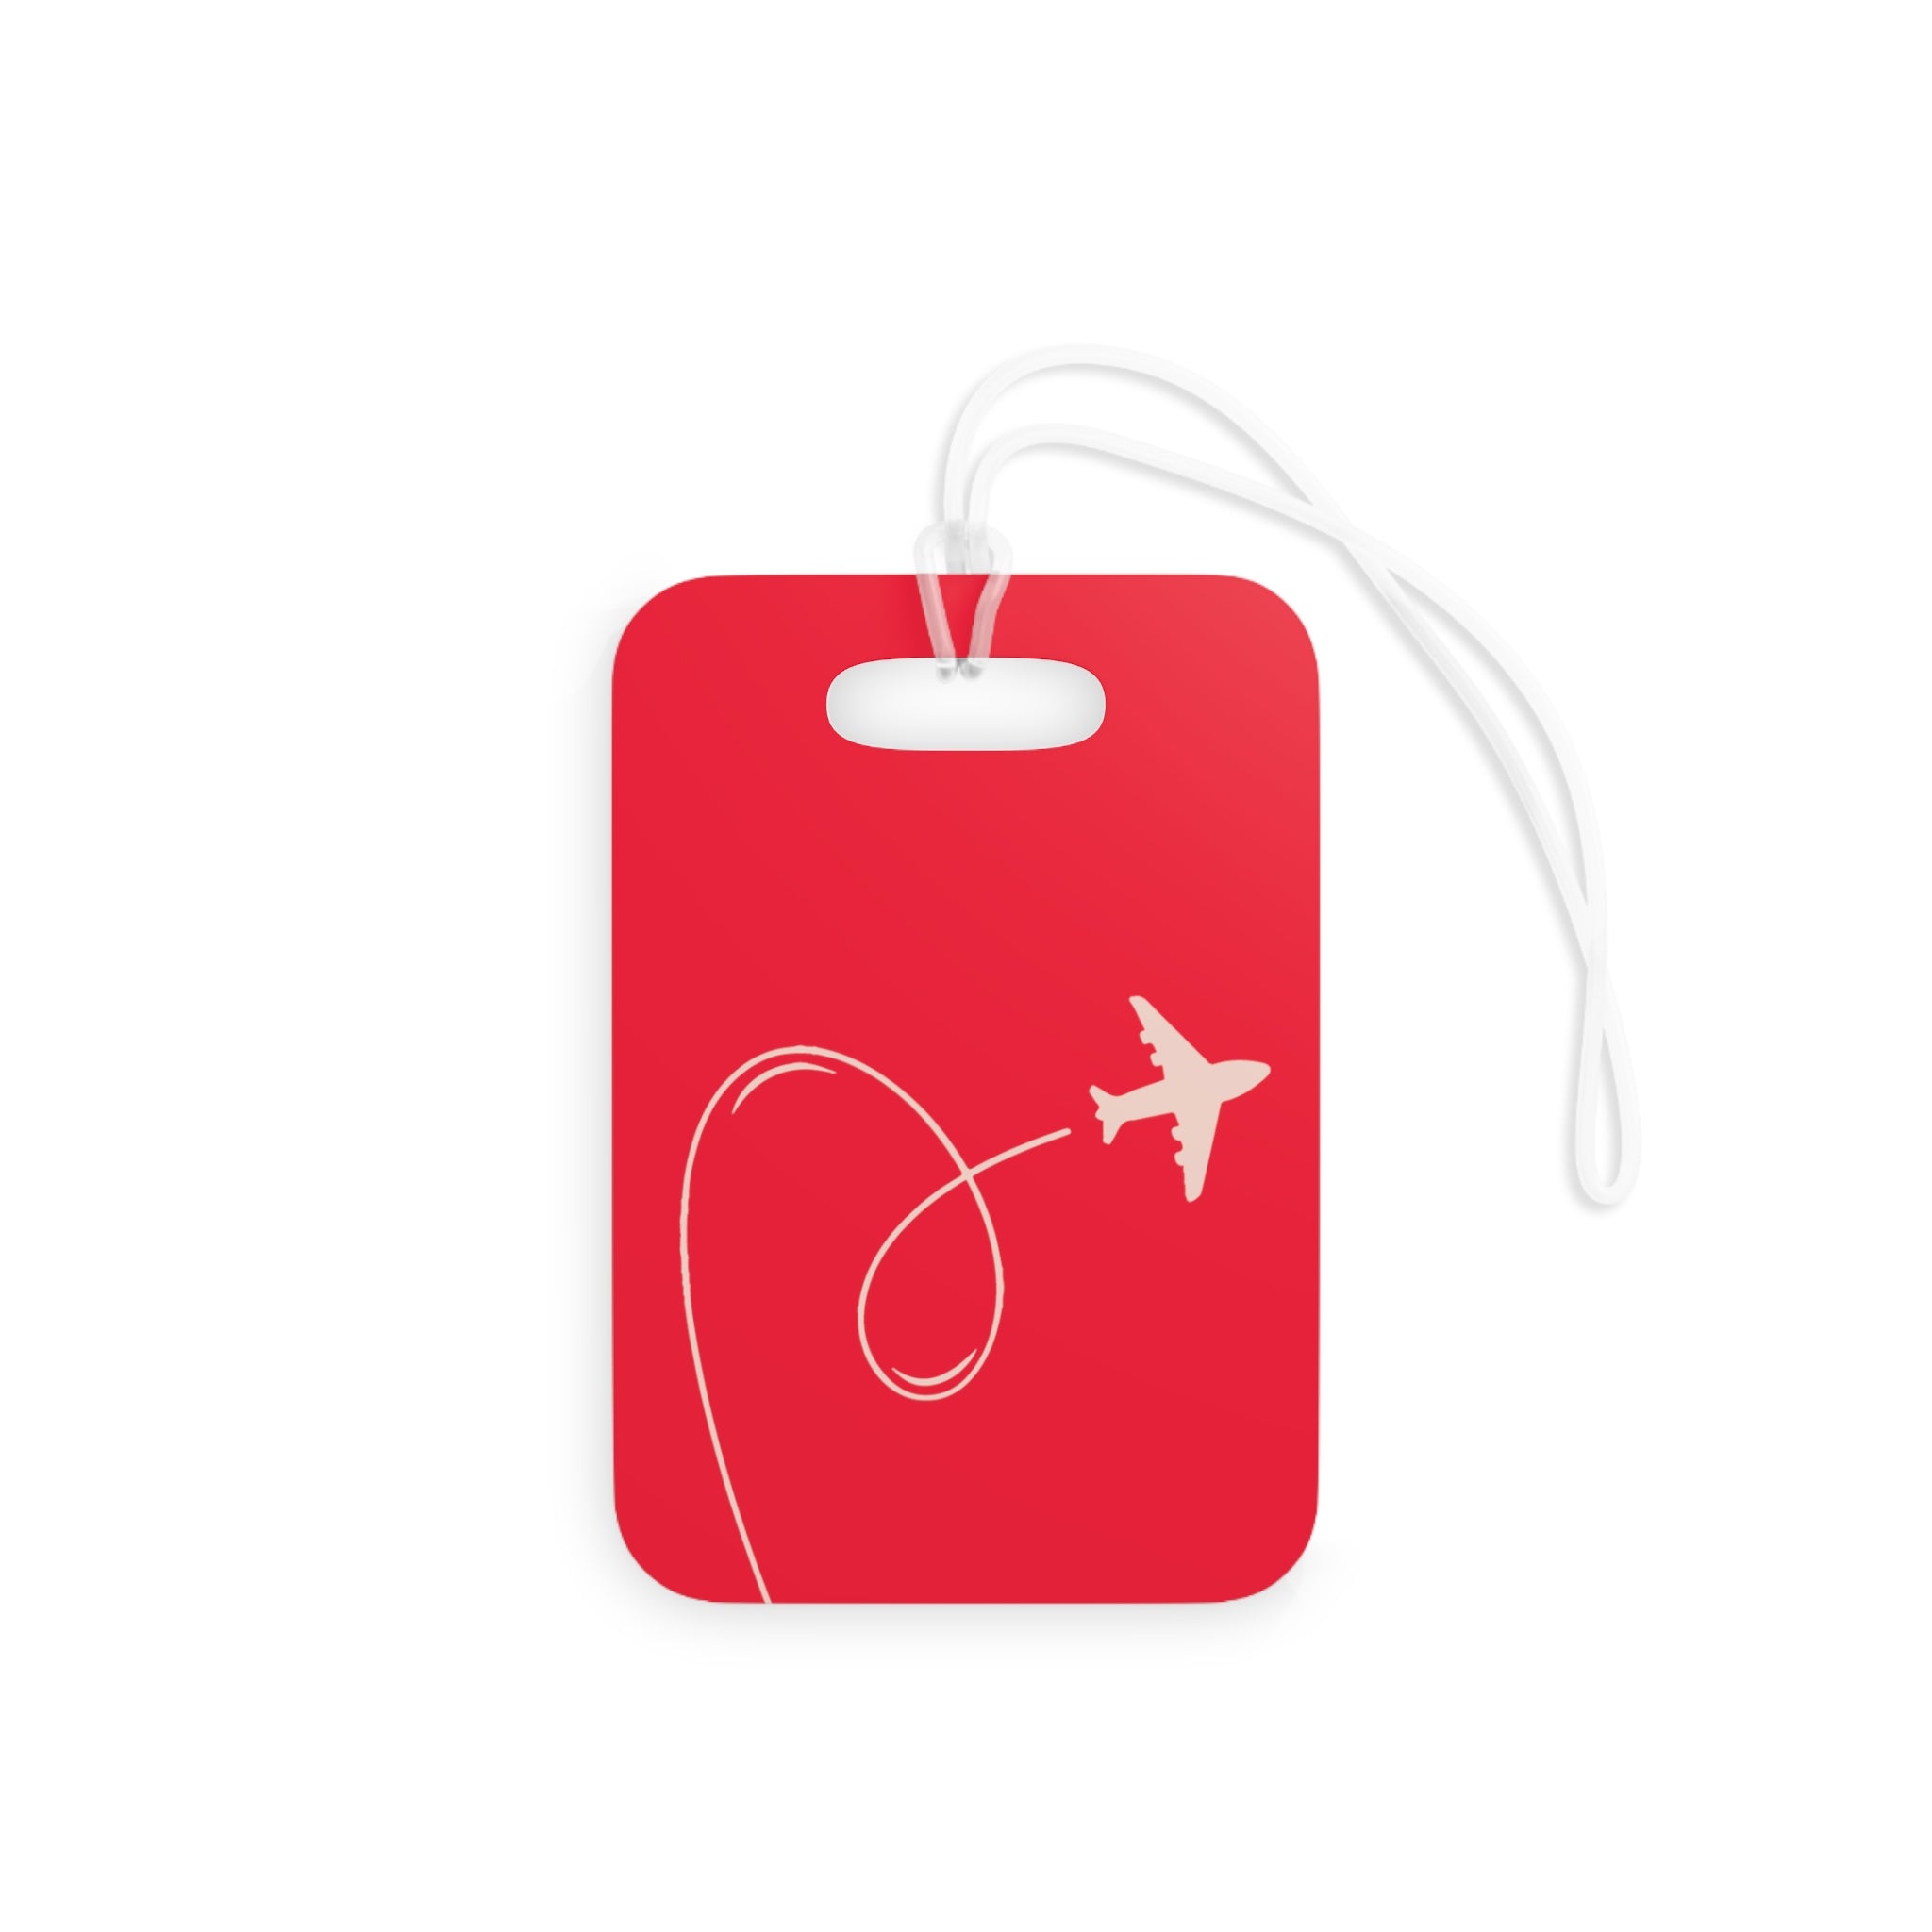 Love this journey for me Luggage Tag (Red)